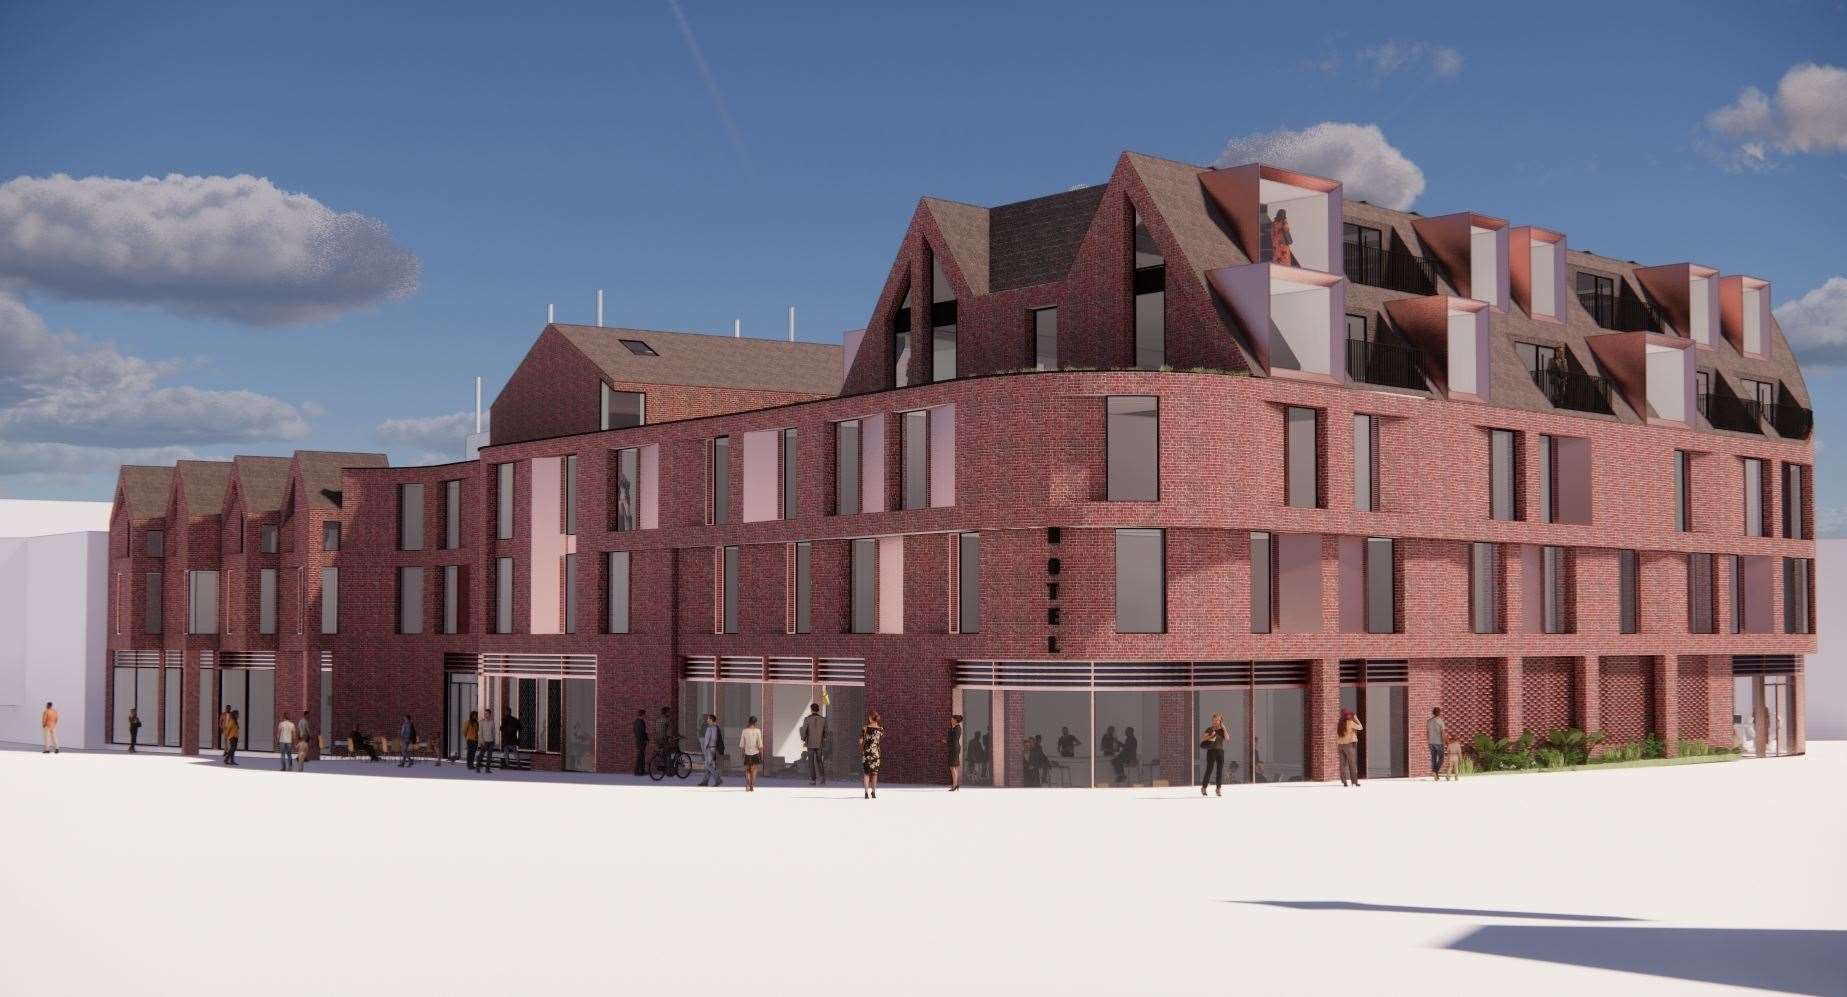 An artist's impression of the planned New Rents hotel